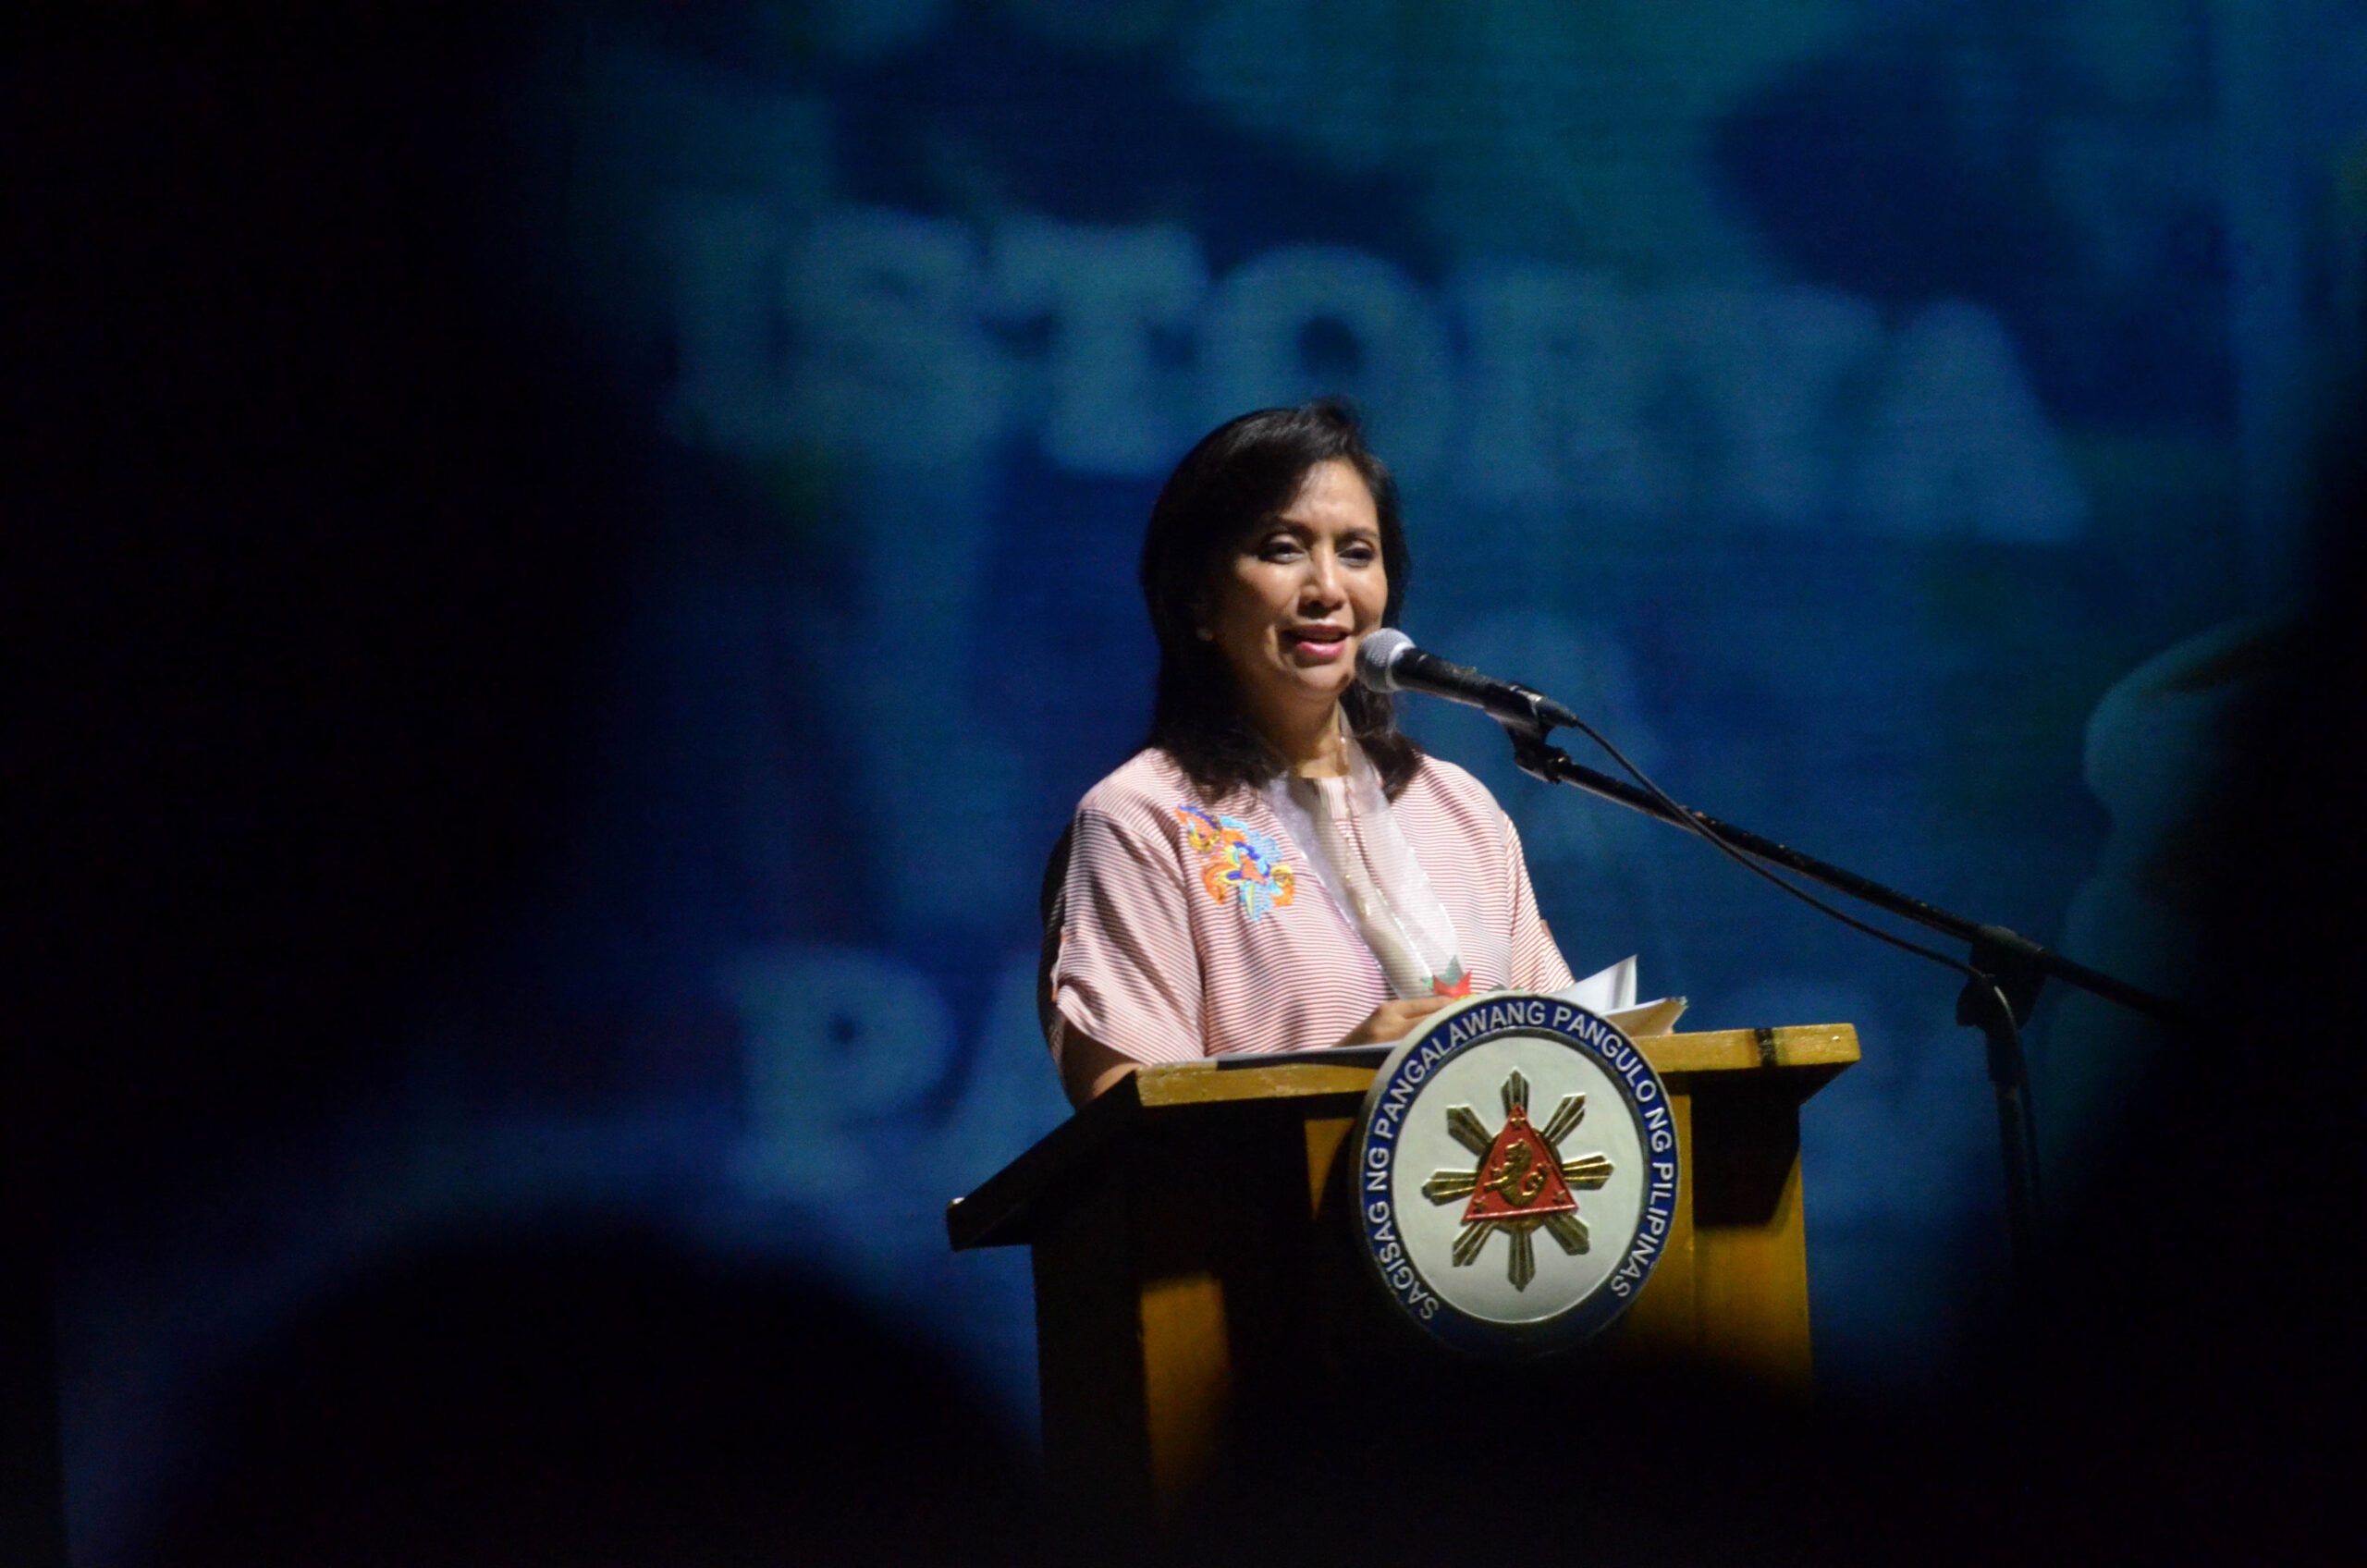 Want revolutionary gov’t? That means you don’t trust this admin – Robredo